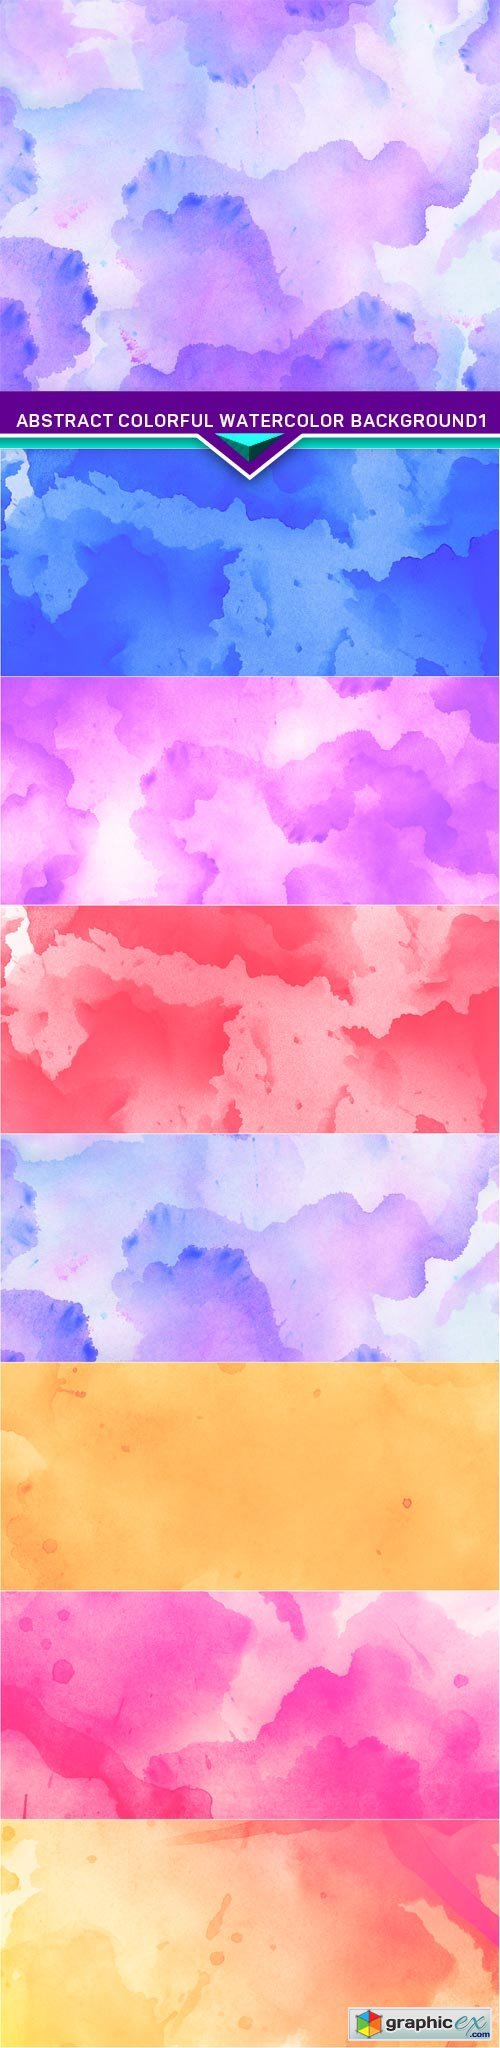 Abstract colorful watercolor background 1 7x JPEG